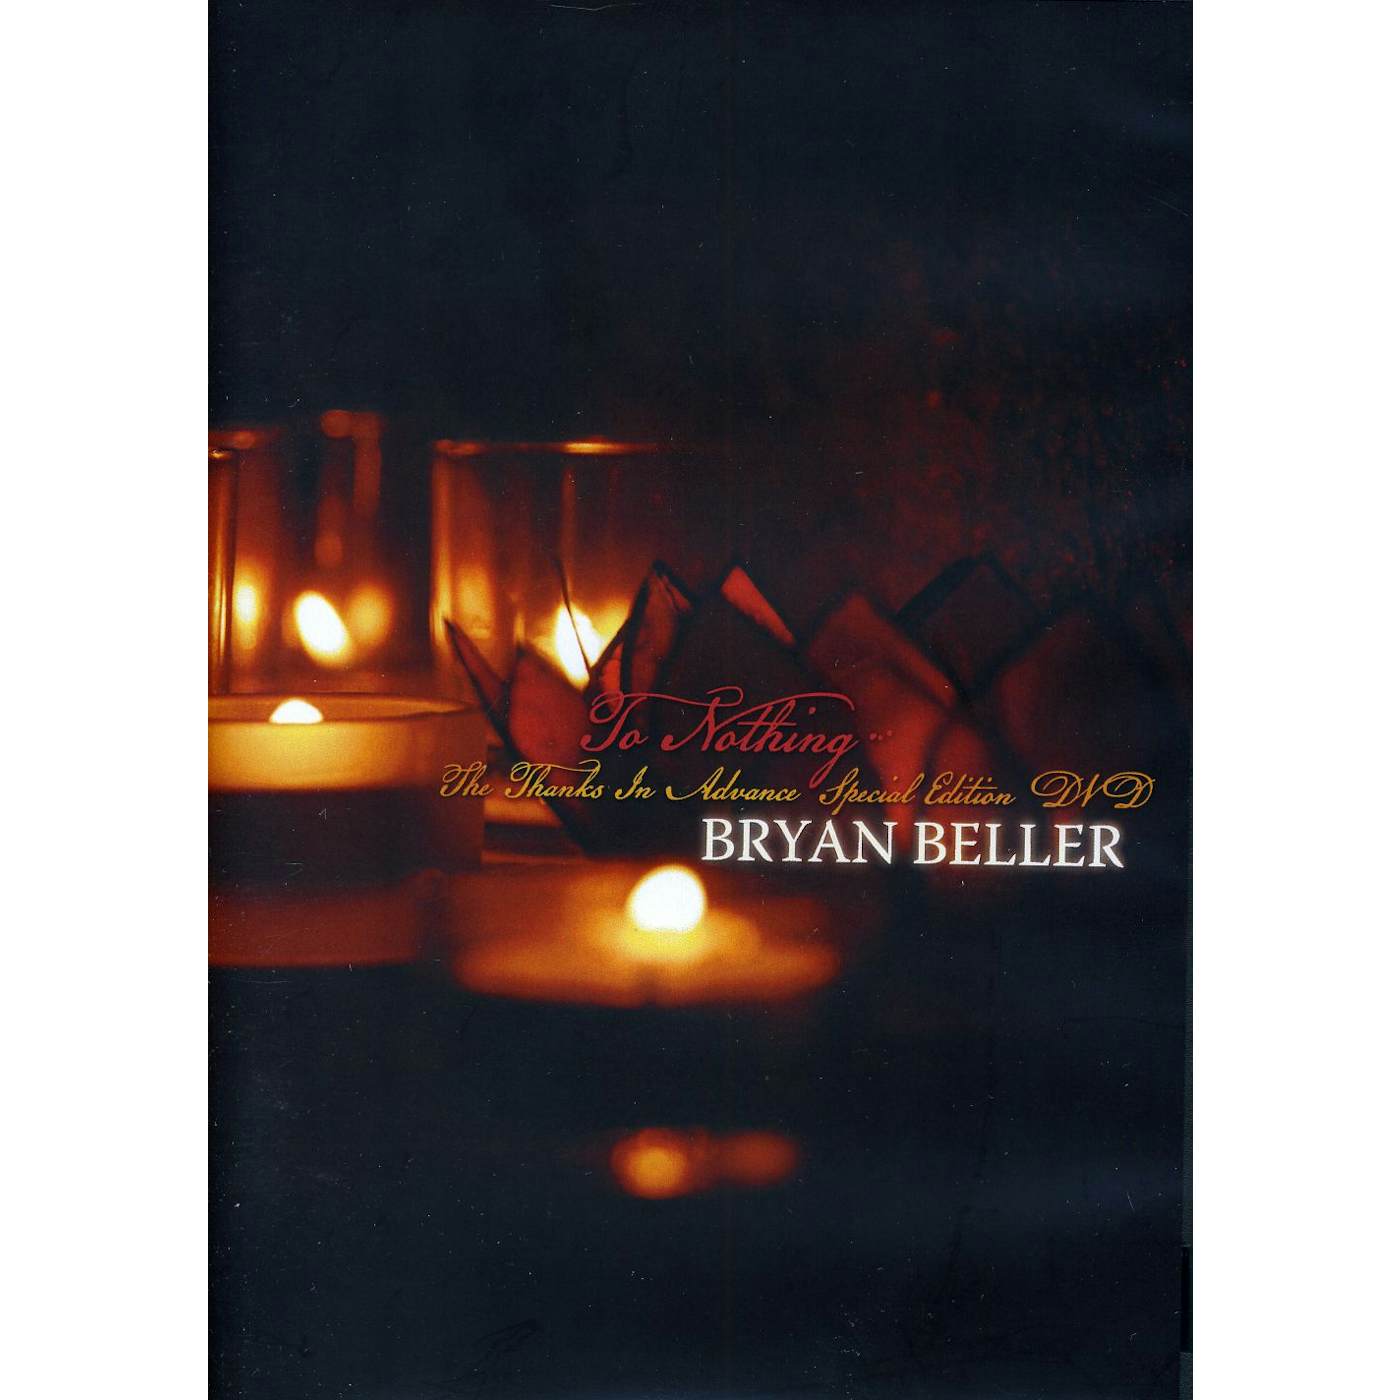 Bryan Beller TO NOTHING: THANKS IN ADVANCE SPECIAL EDITION DVD DVD